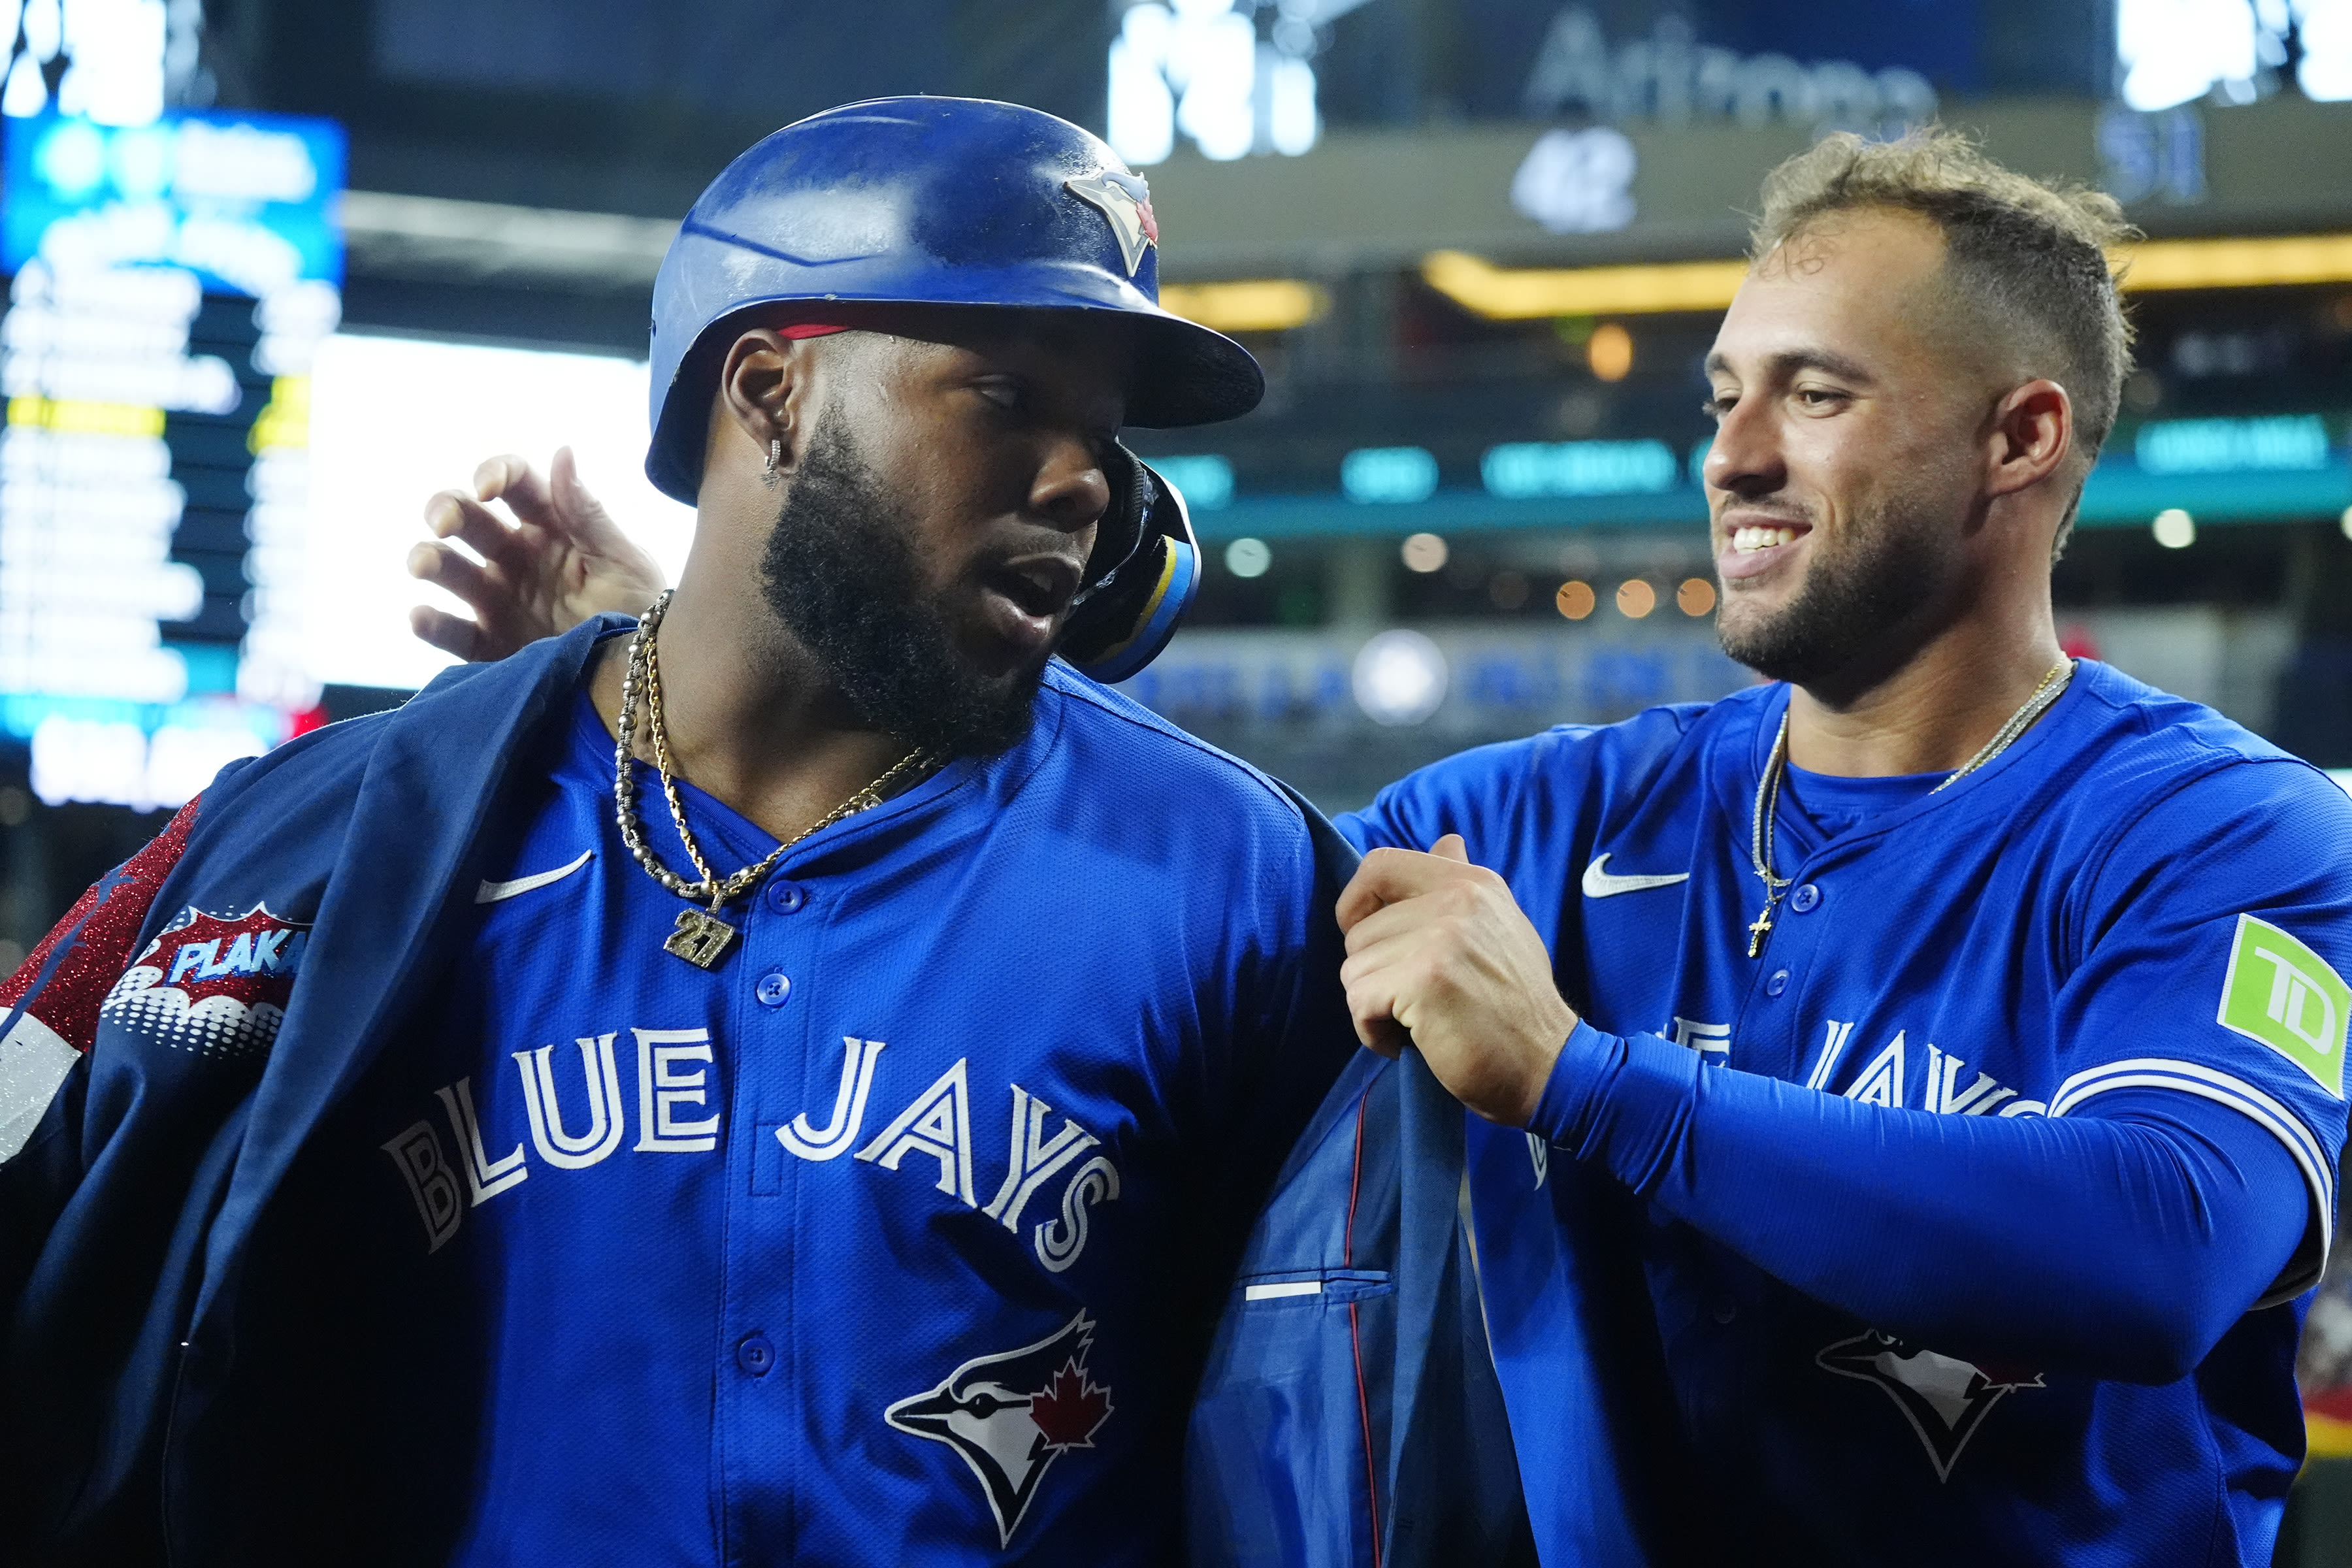 Blue Jays blow 7-run lead, but recover to beat Diamondbacks 8-7 after Guerrero's solo homer